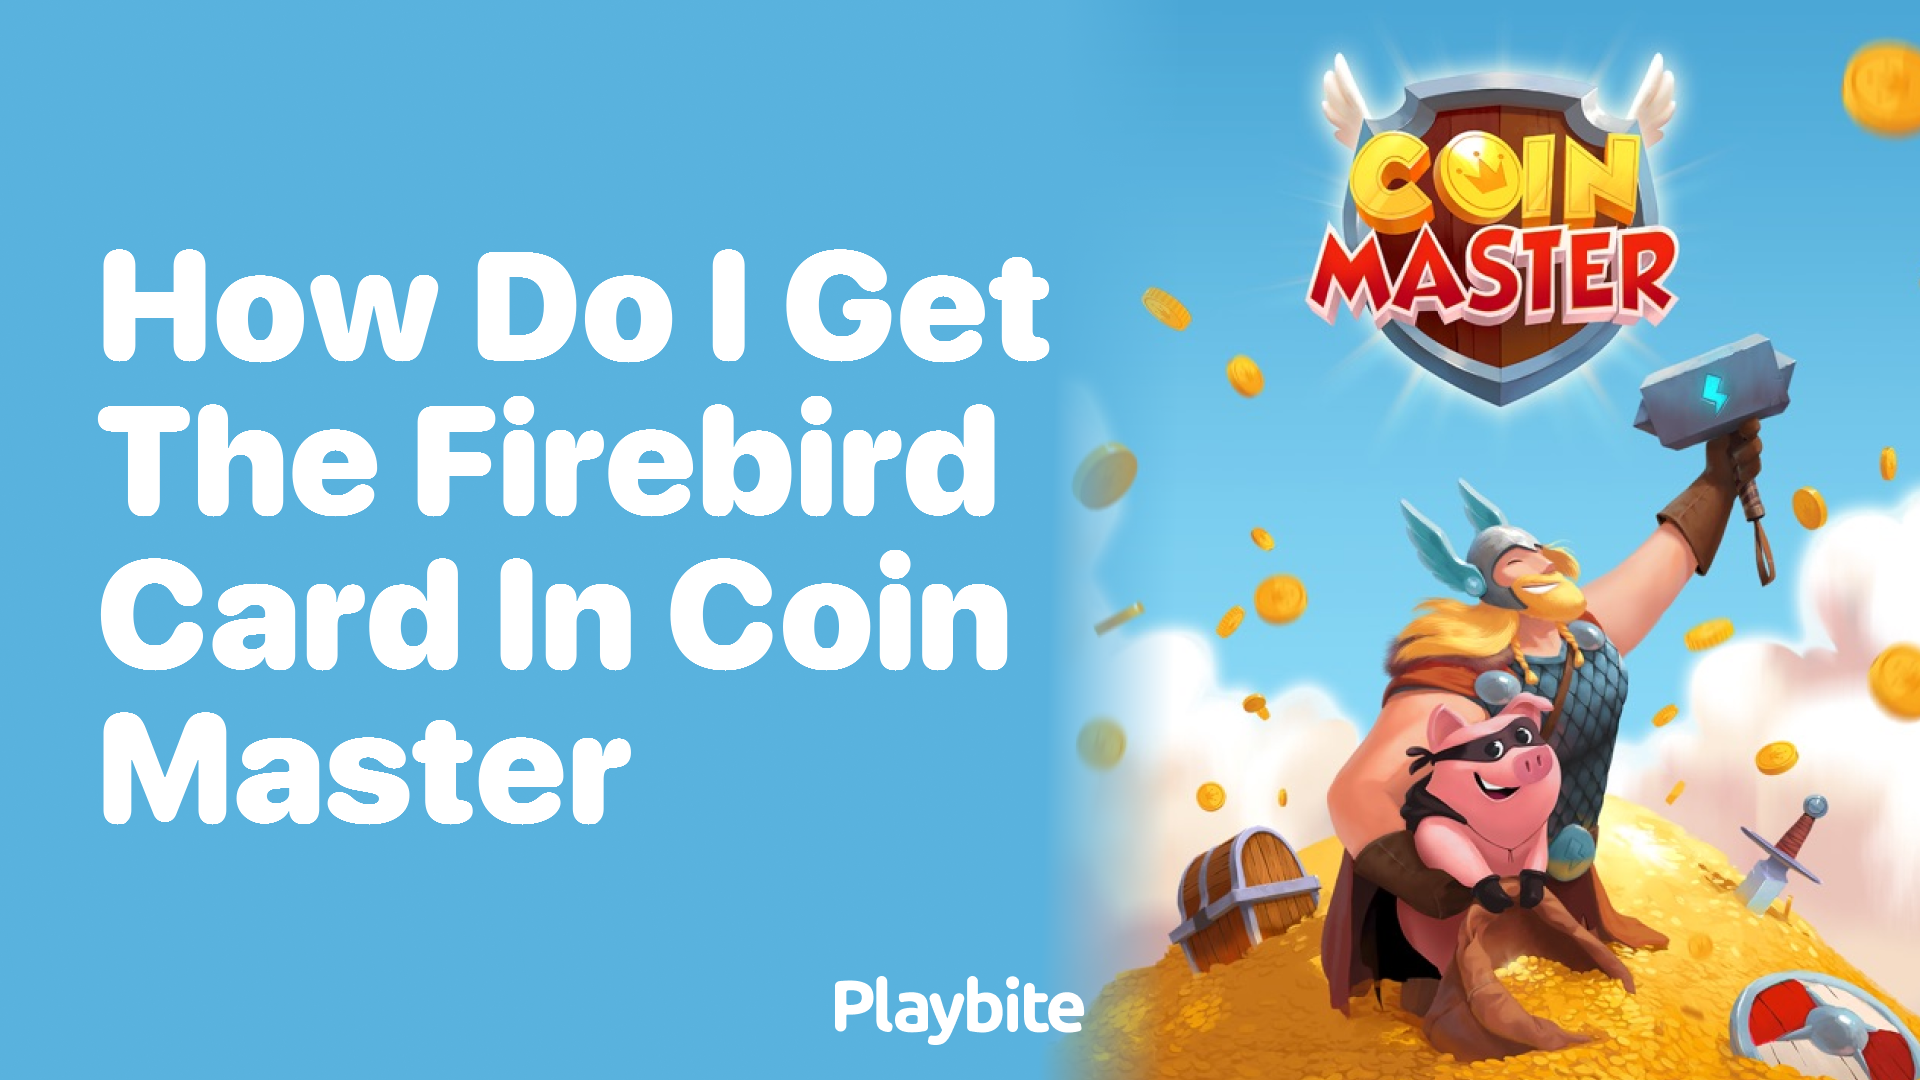 How I Got Coin Master Free Cards with (7 Proven Methods)